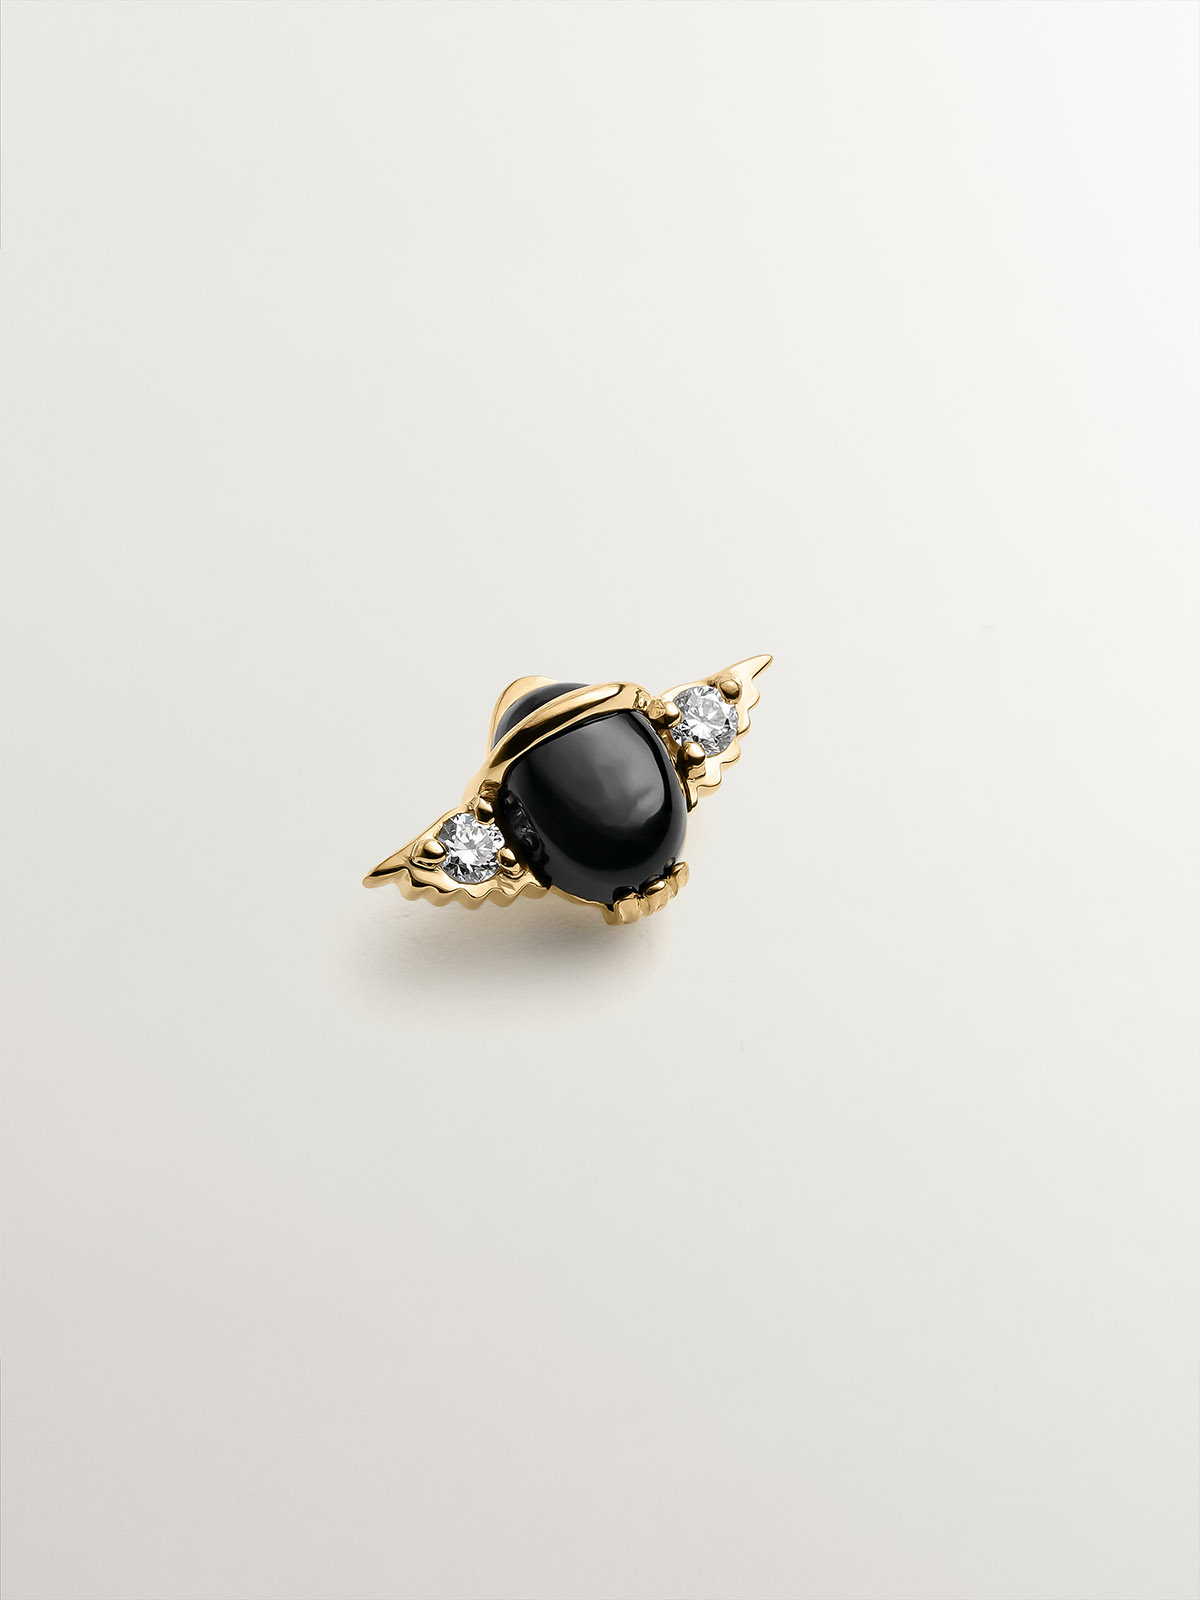 18K yellow gold piercing in the shape of a beetle with onyx and diamonds.